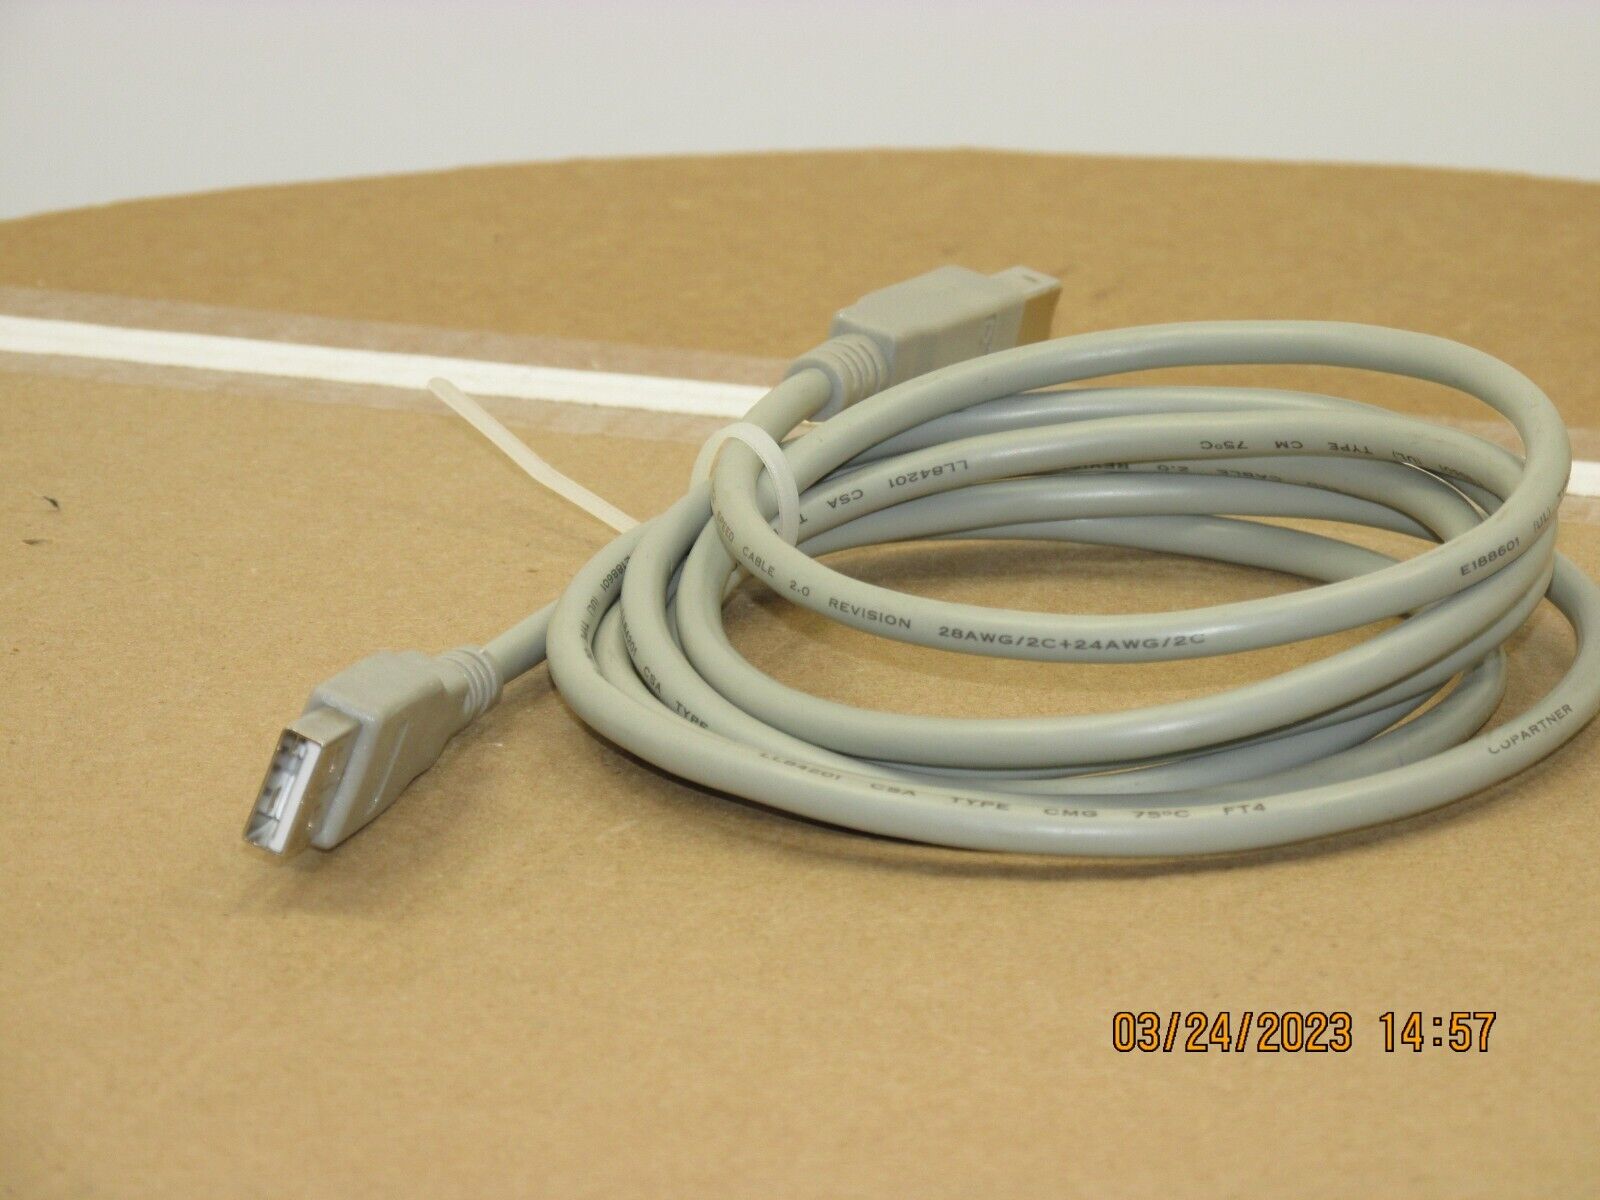 The listing is for: USB Cable-USB A to USB B Cable-M/M-70\